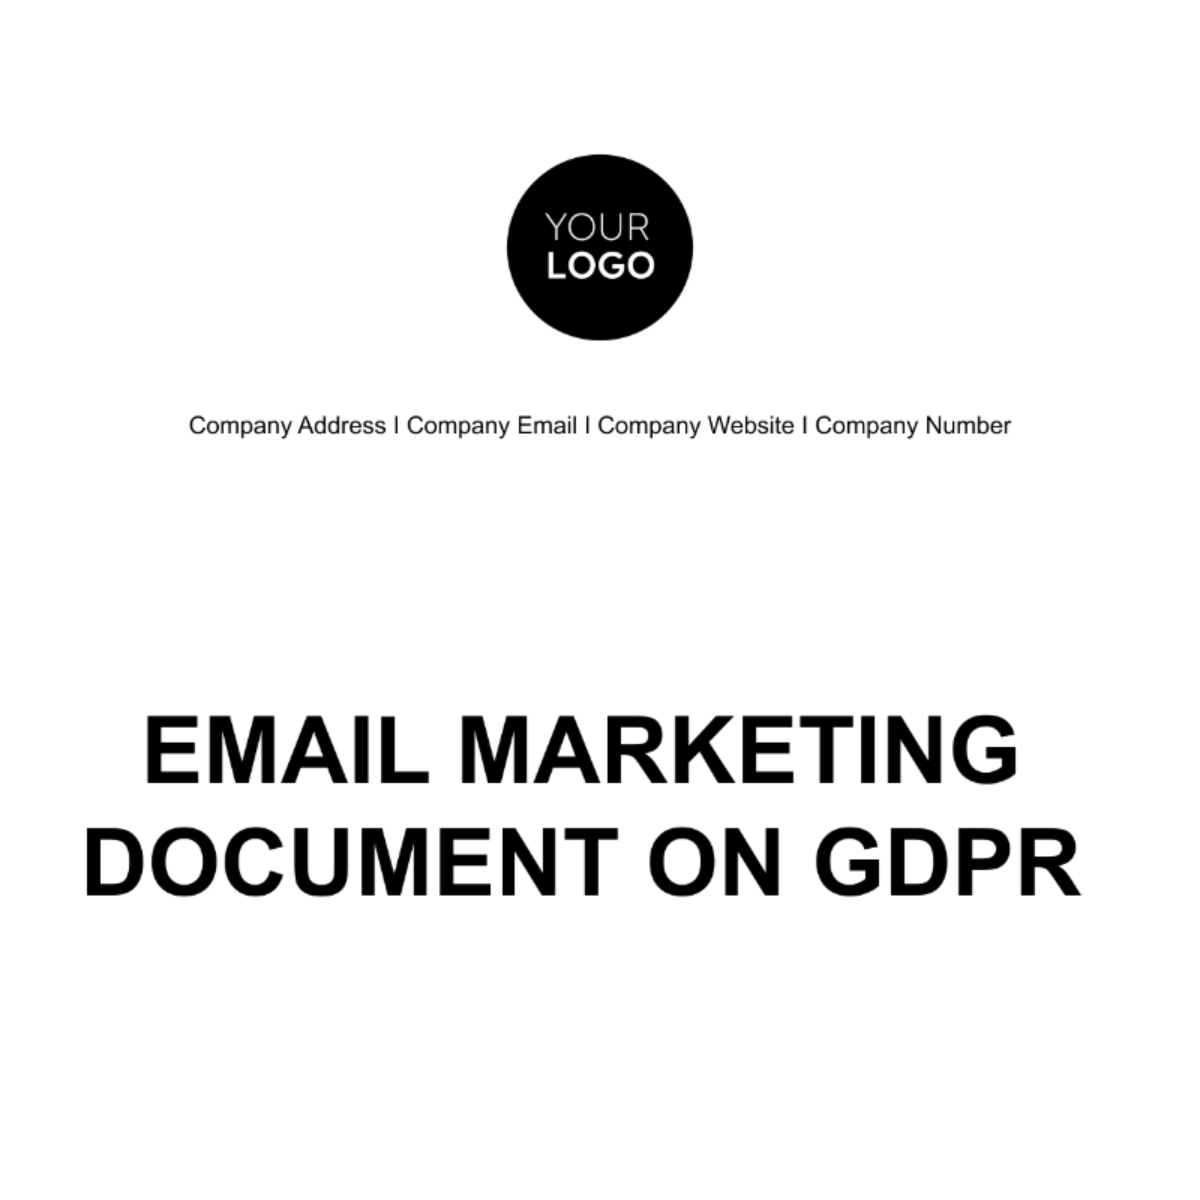 Free Email Marketing Document on GDPR Template